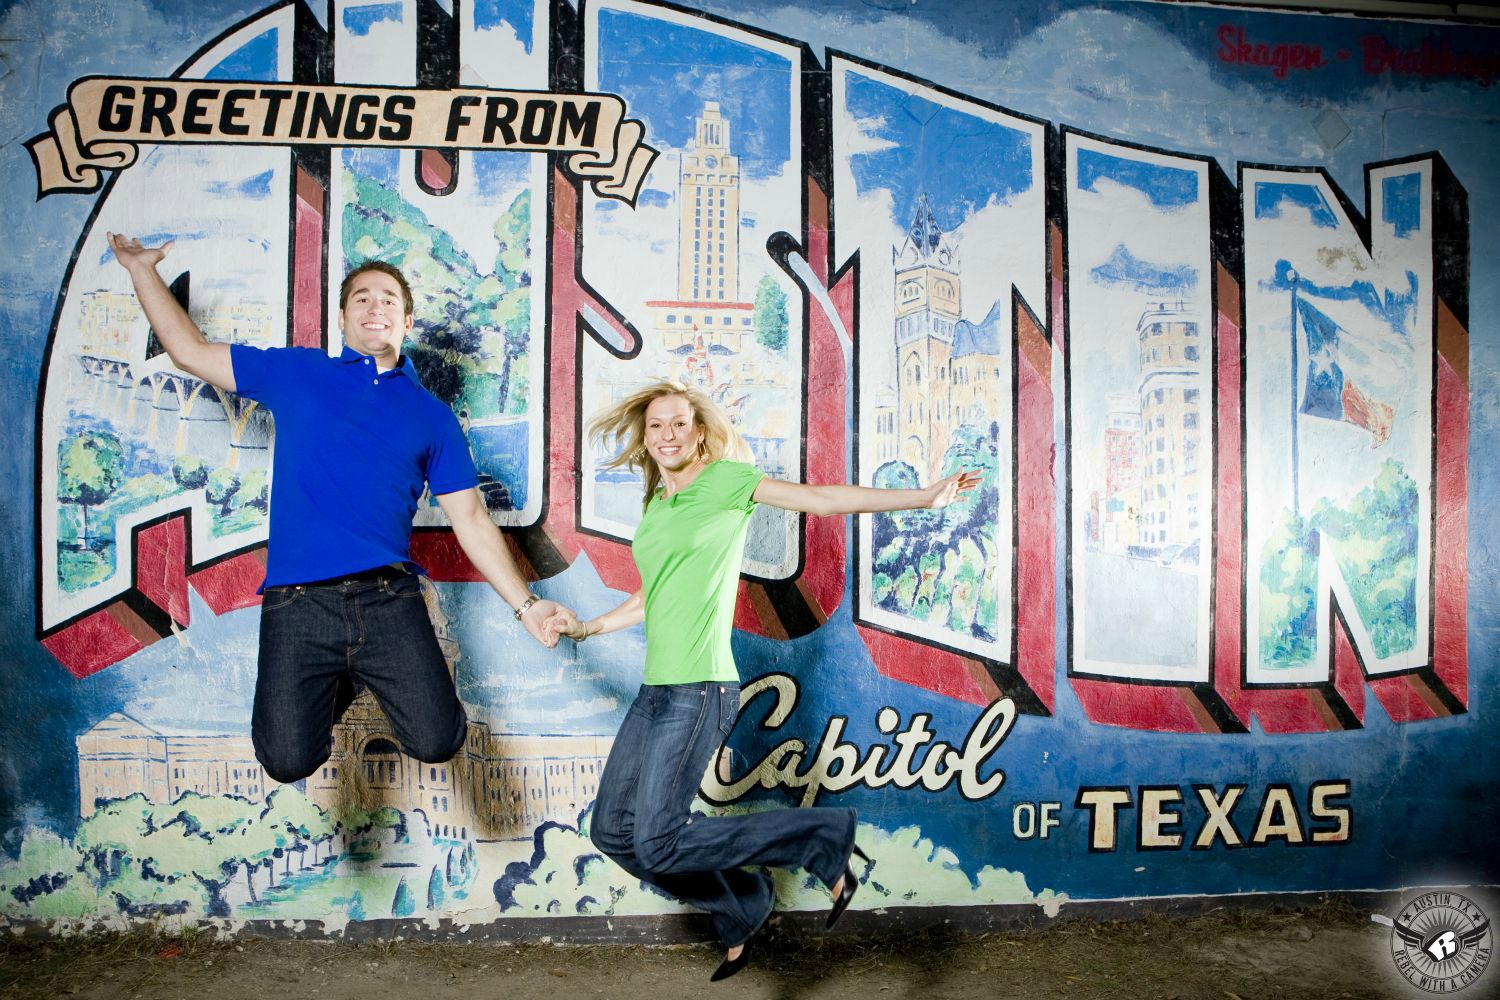 hot blond girl wearing a green short sleeve shirt, blue jeans and black heals jumps with brunette guy in blue collared shirt and blue jeans in front of the greetings austin sign in south austin in this engagement photo near soco 